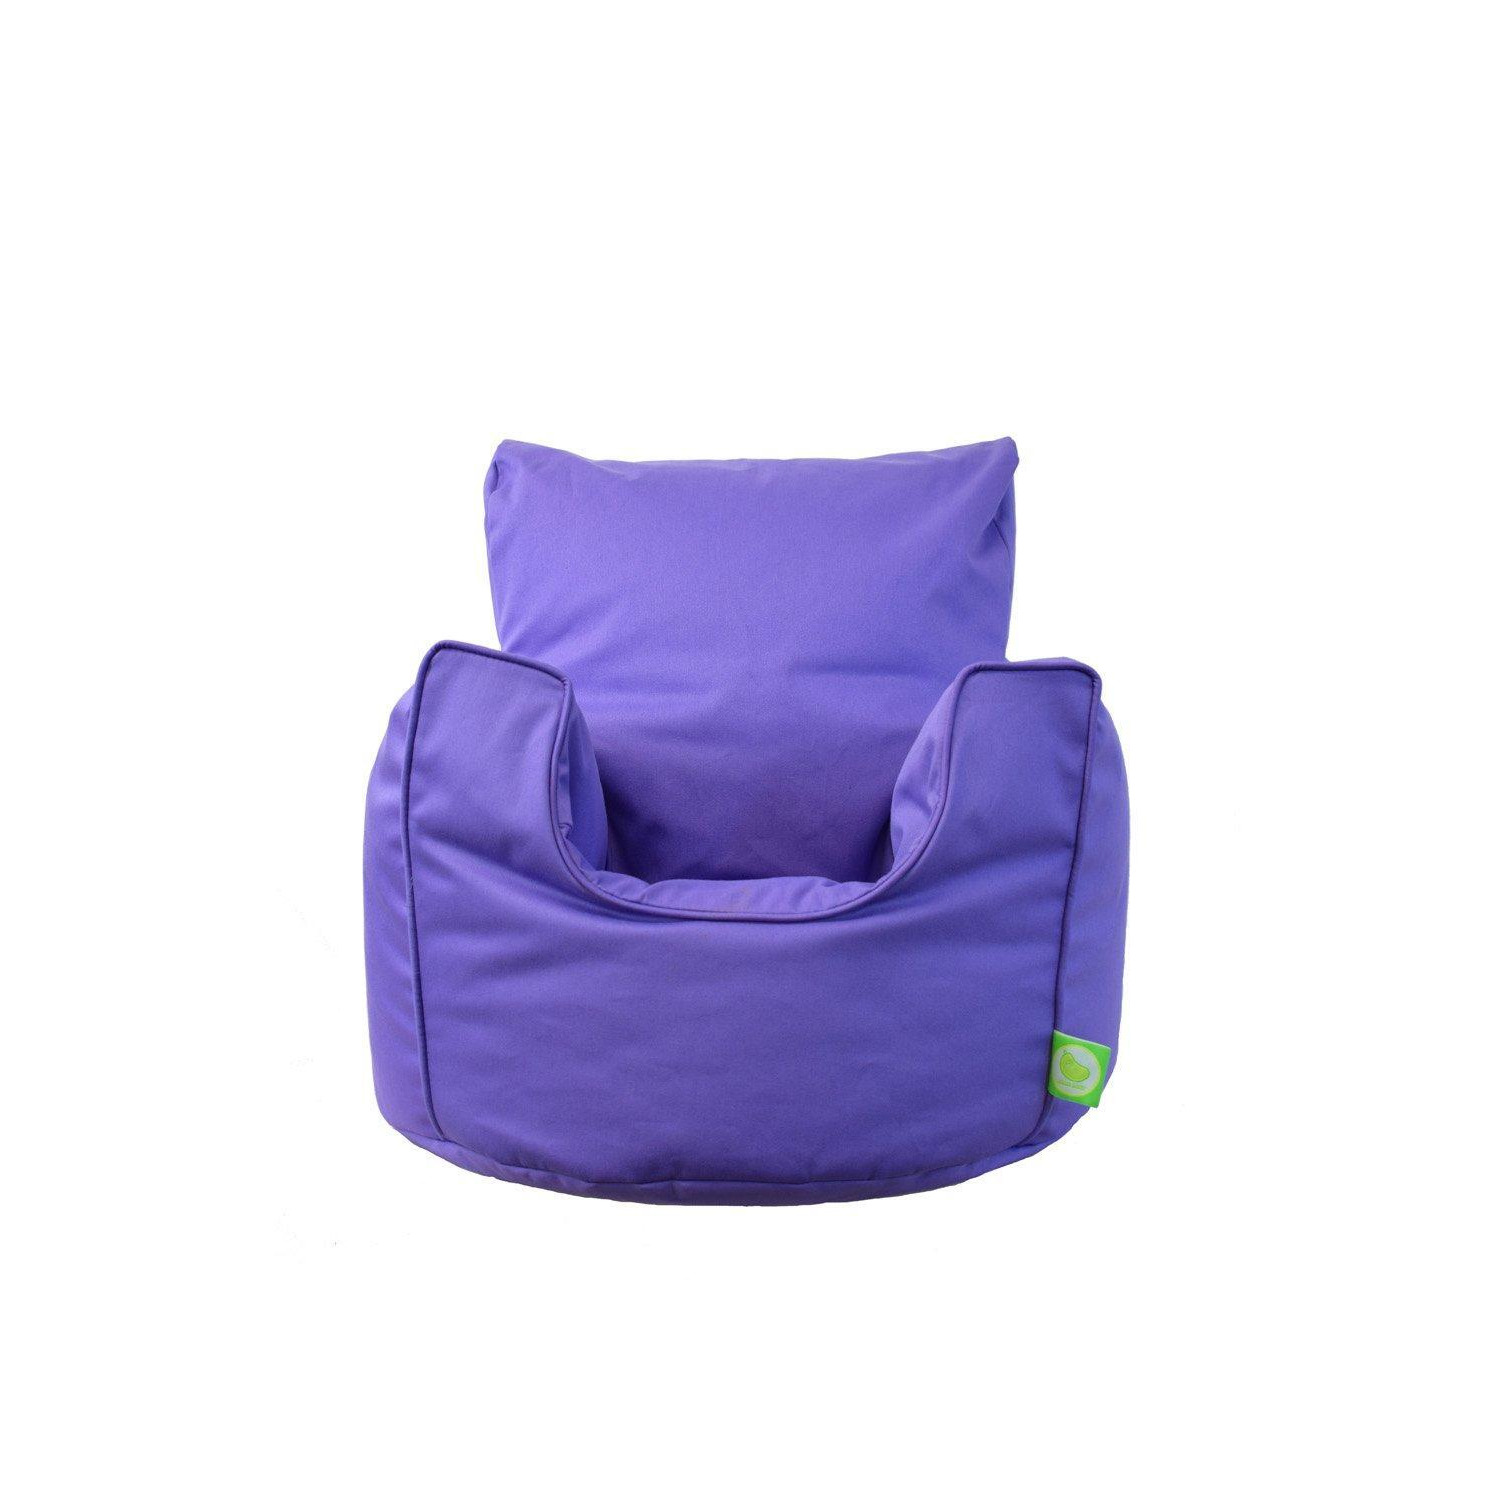 Cotton Twill Purple Lilac Bean Bag Arm Chair Toddler Size - image 1